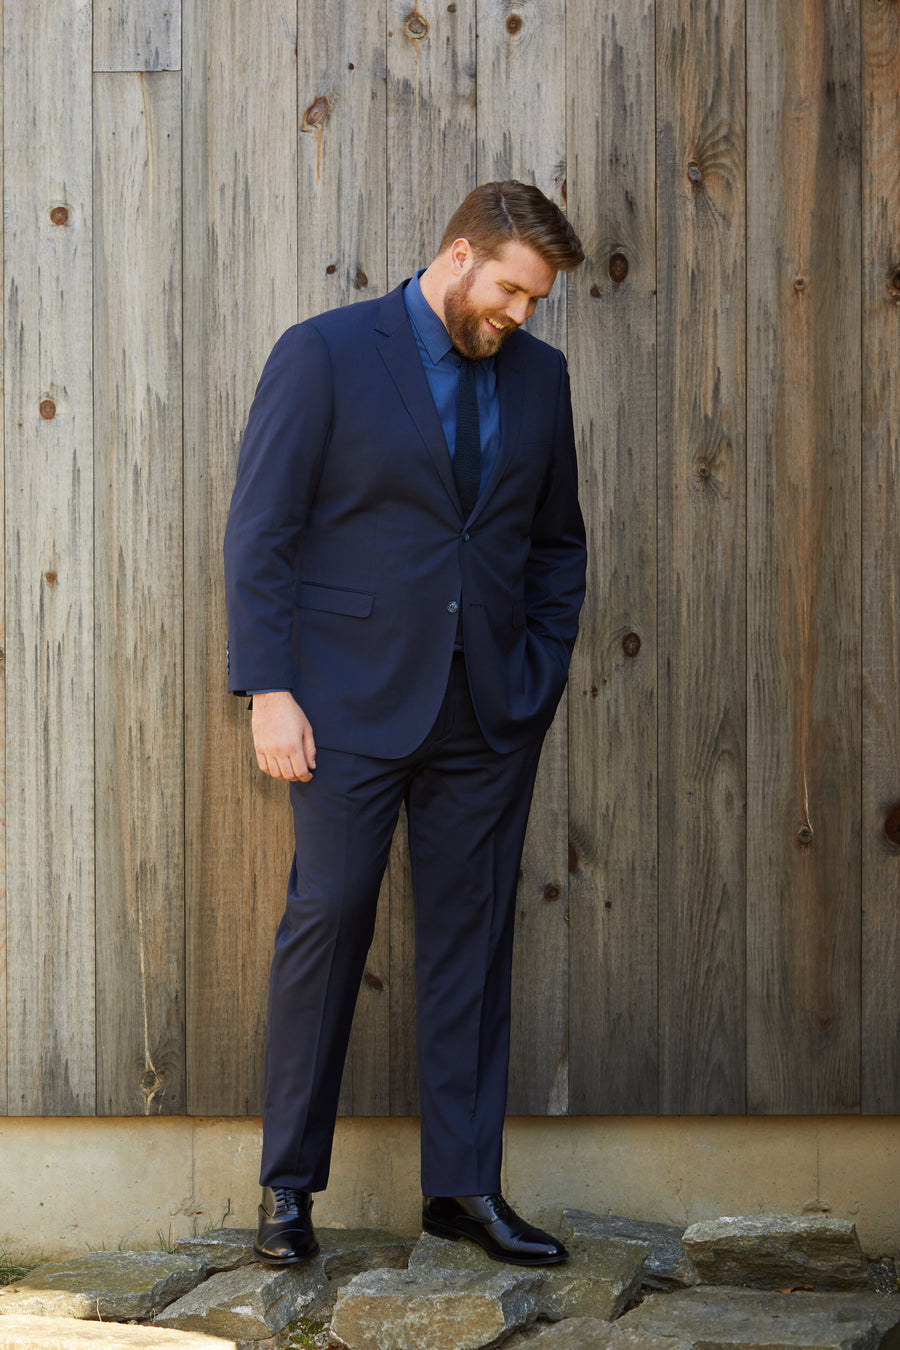 Zach is wearing TGS' Navy Blue Suit Jacket and Navy Blue Suit Pants paired, KORDELL Black Shoes.